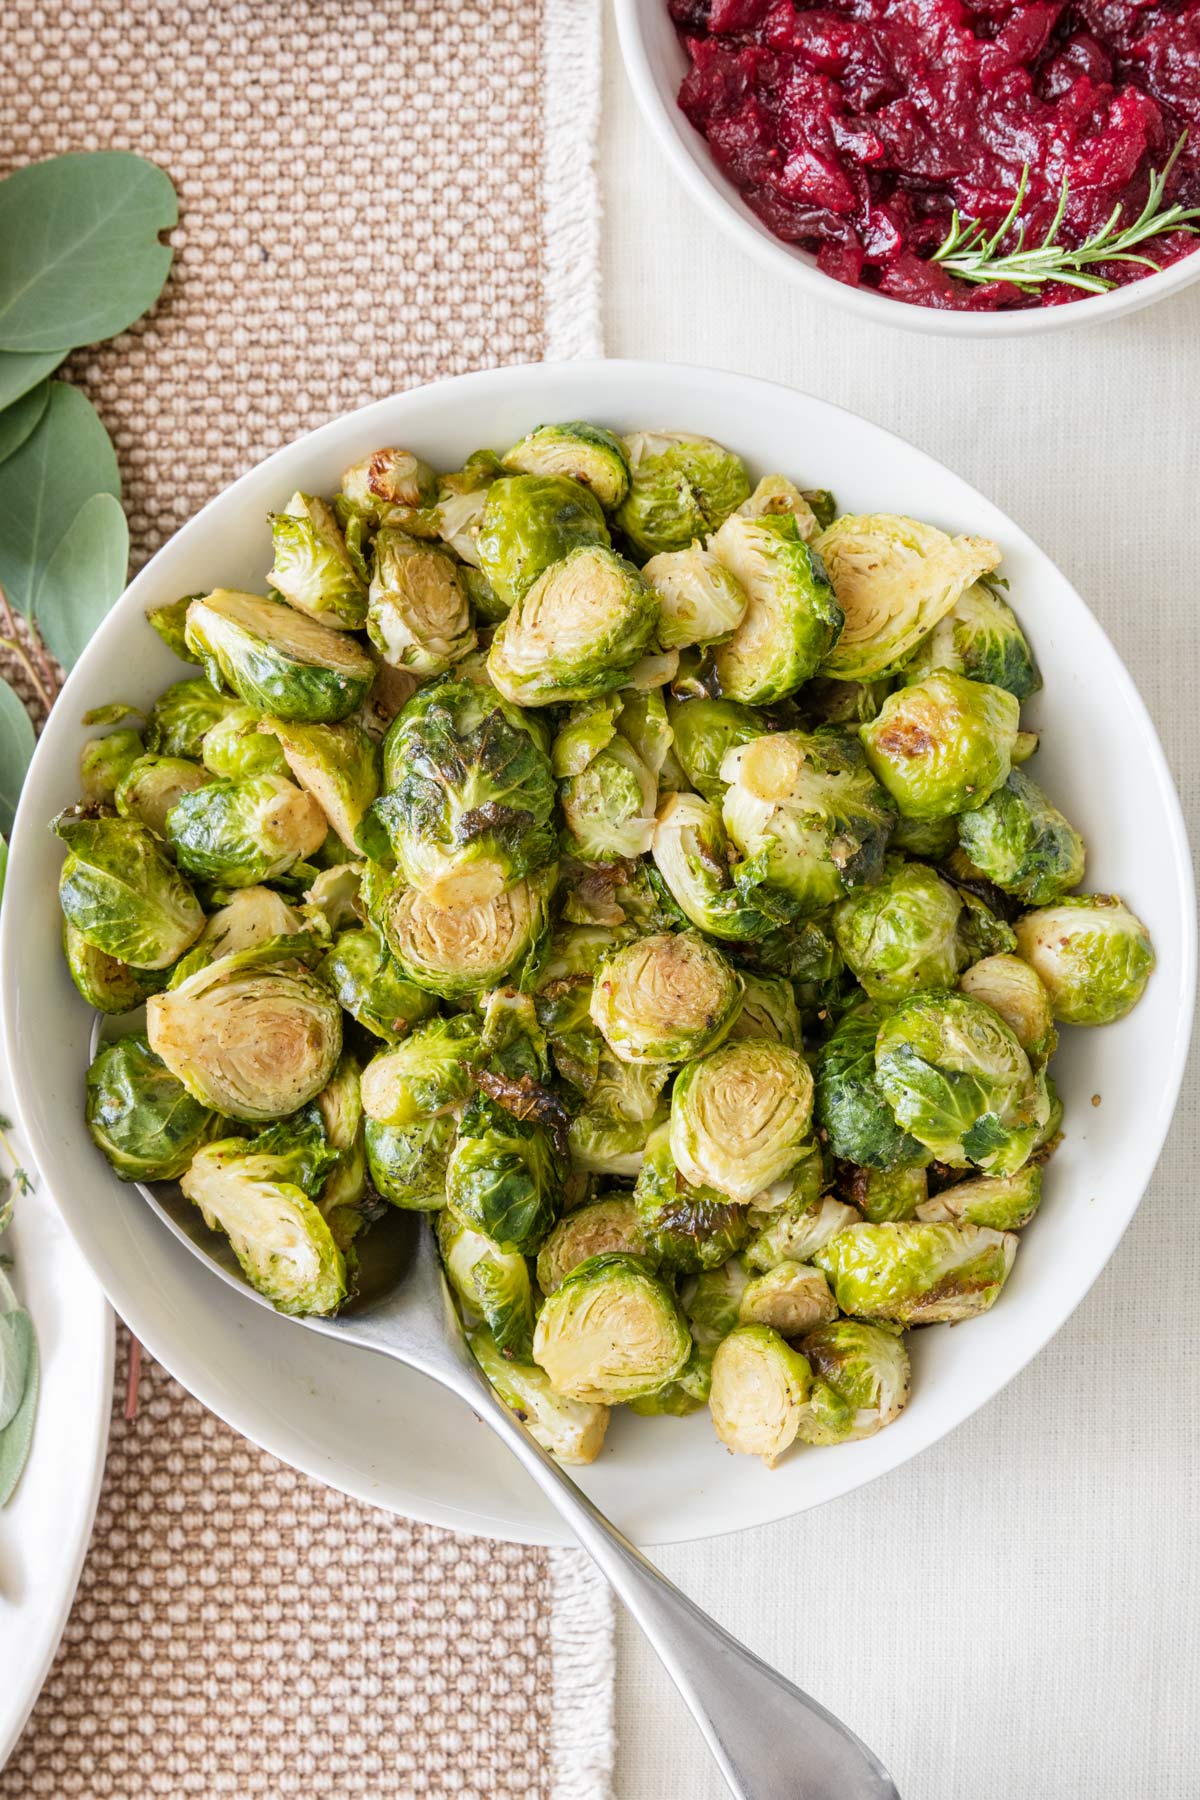 Roasted brussel sprout halves in a serving bowl with spoon inserted inside and a small dish of cranberry sauce nearby.